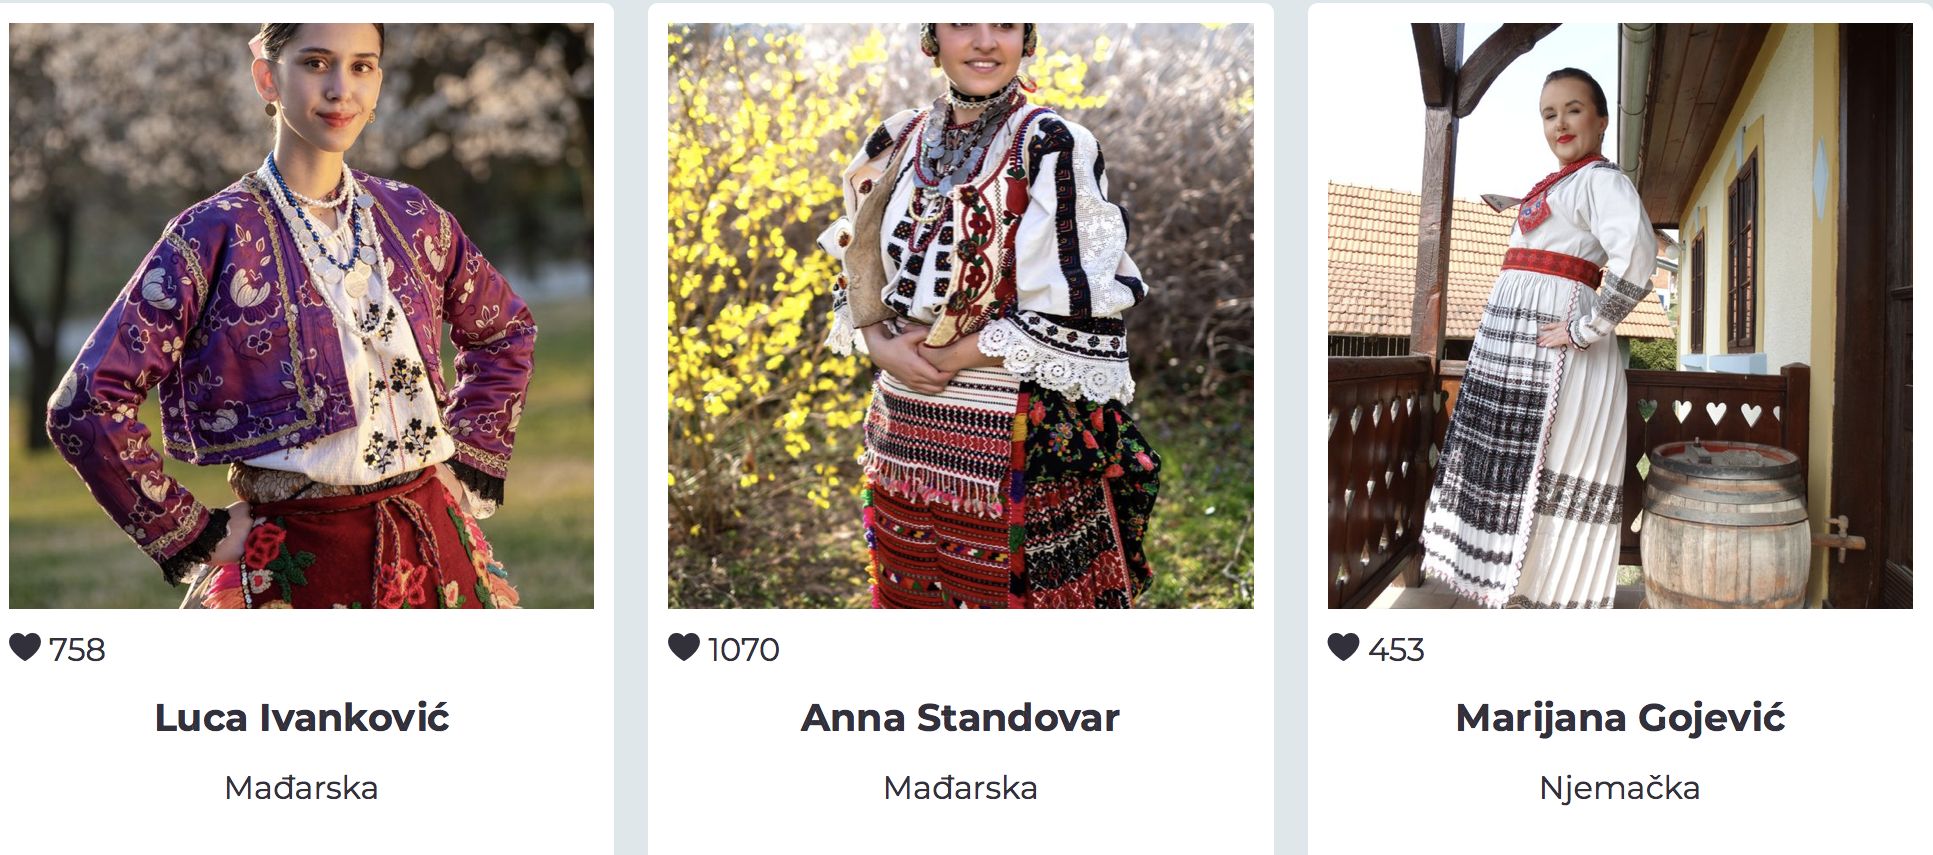 The most beautiful Croatian in folk costume abroad will be selected - applicants 